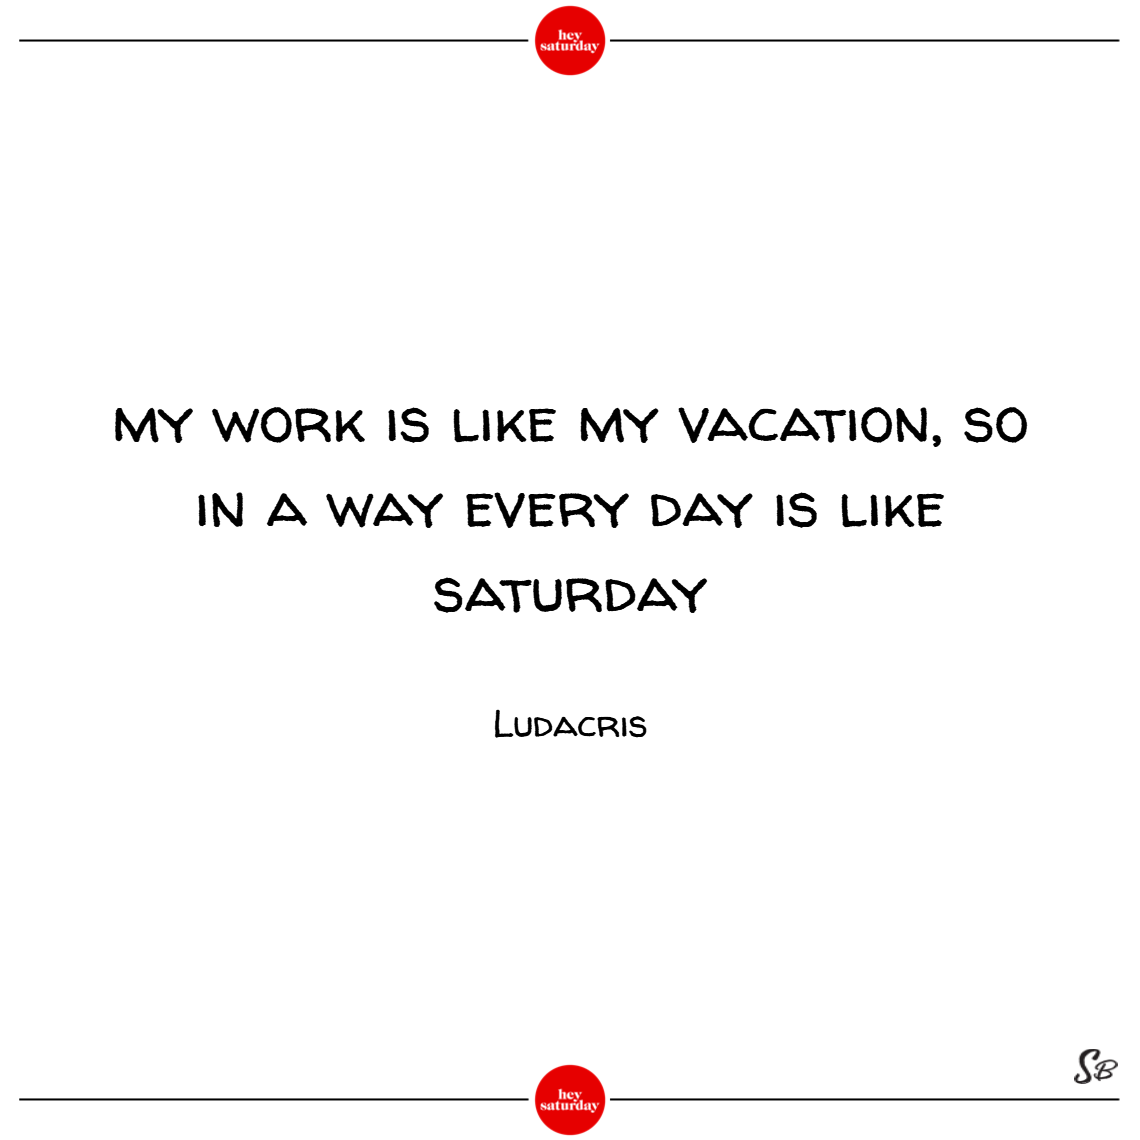 My work is like my vacation, so in a way every day is like saturday. - ludacris (1)